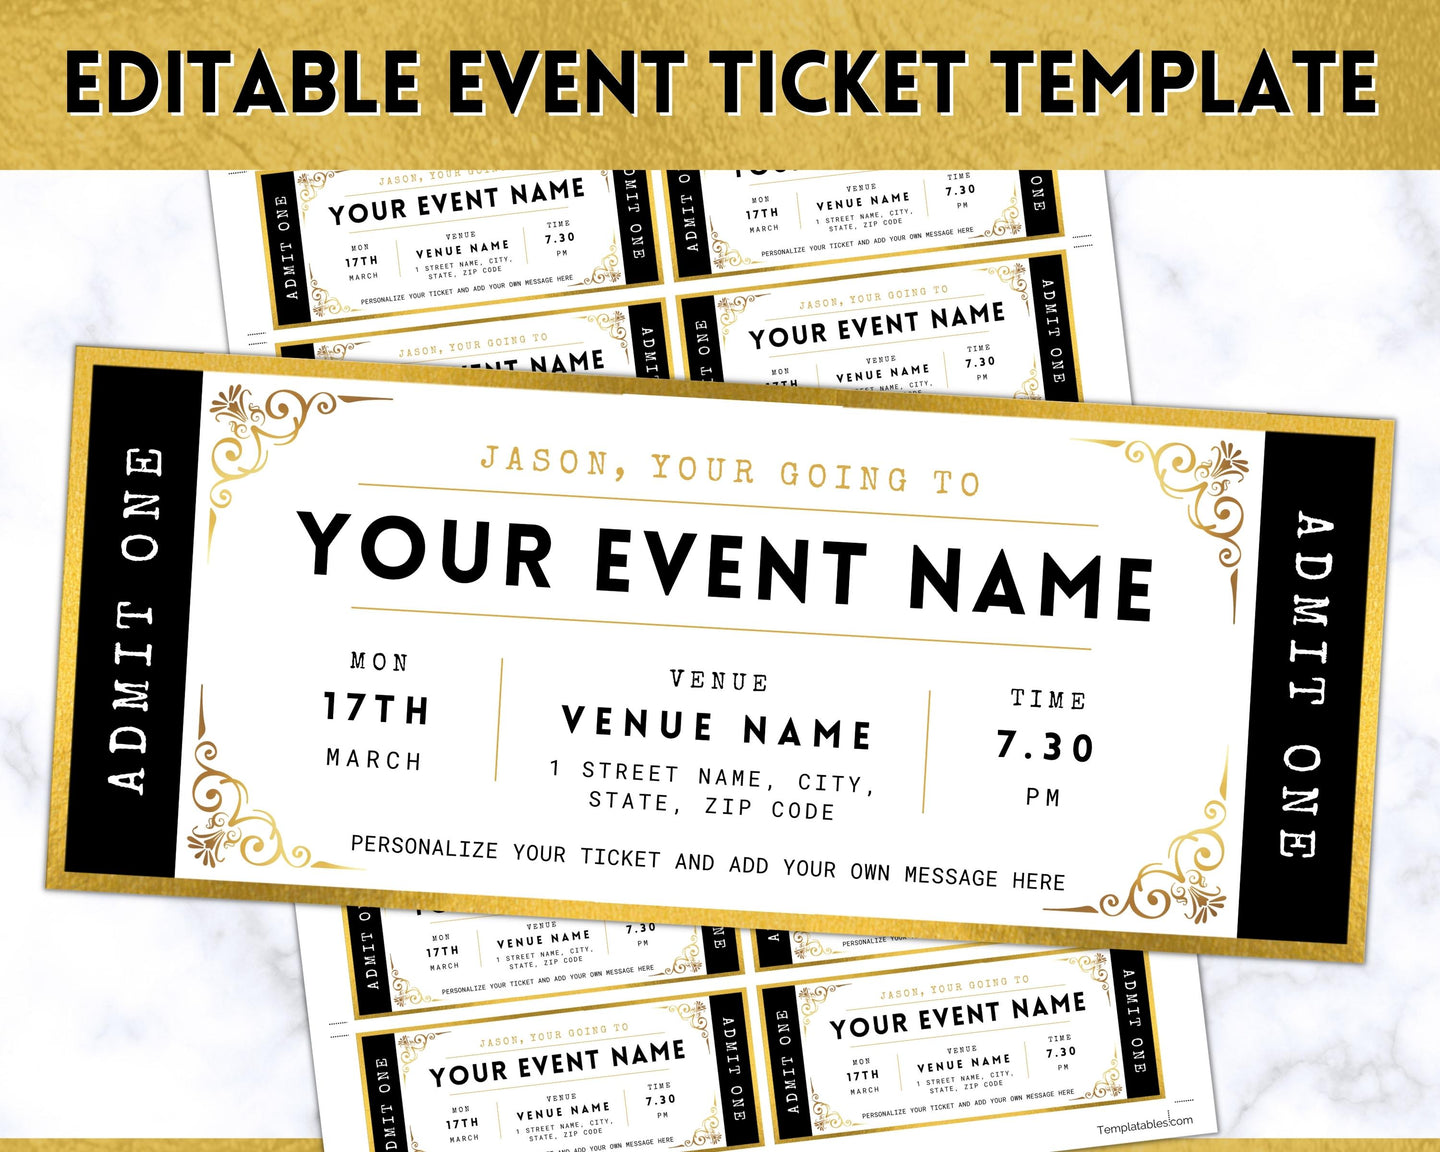 EDITABLE Event Ticket Gift Template | DIY Templates for Concerts, Theatre Shows, Surprise Gifts & Special Occassions | Gold